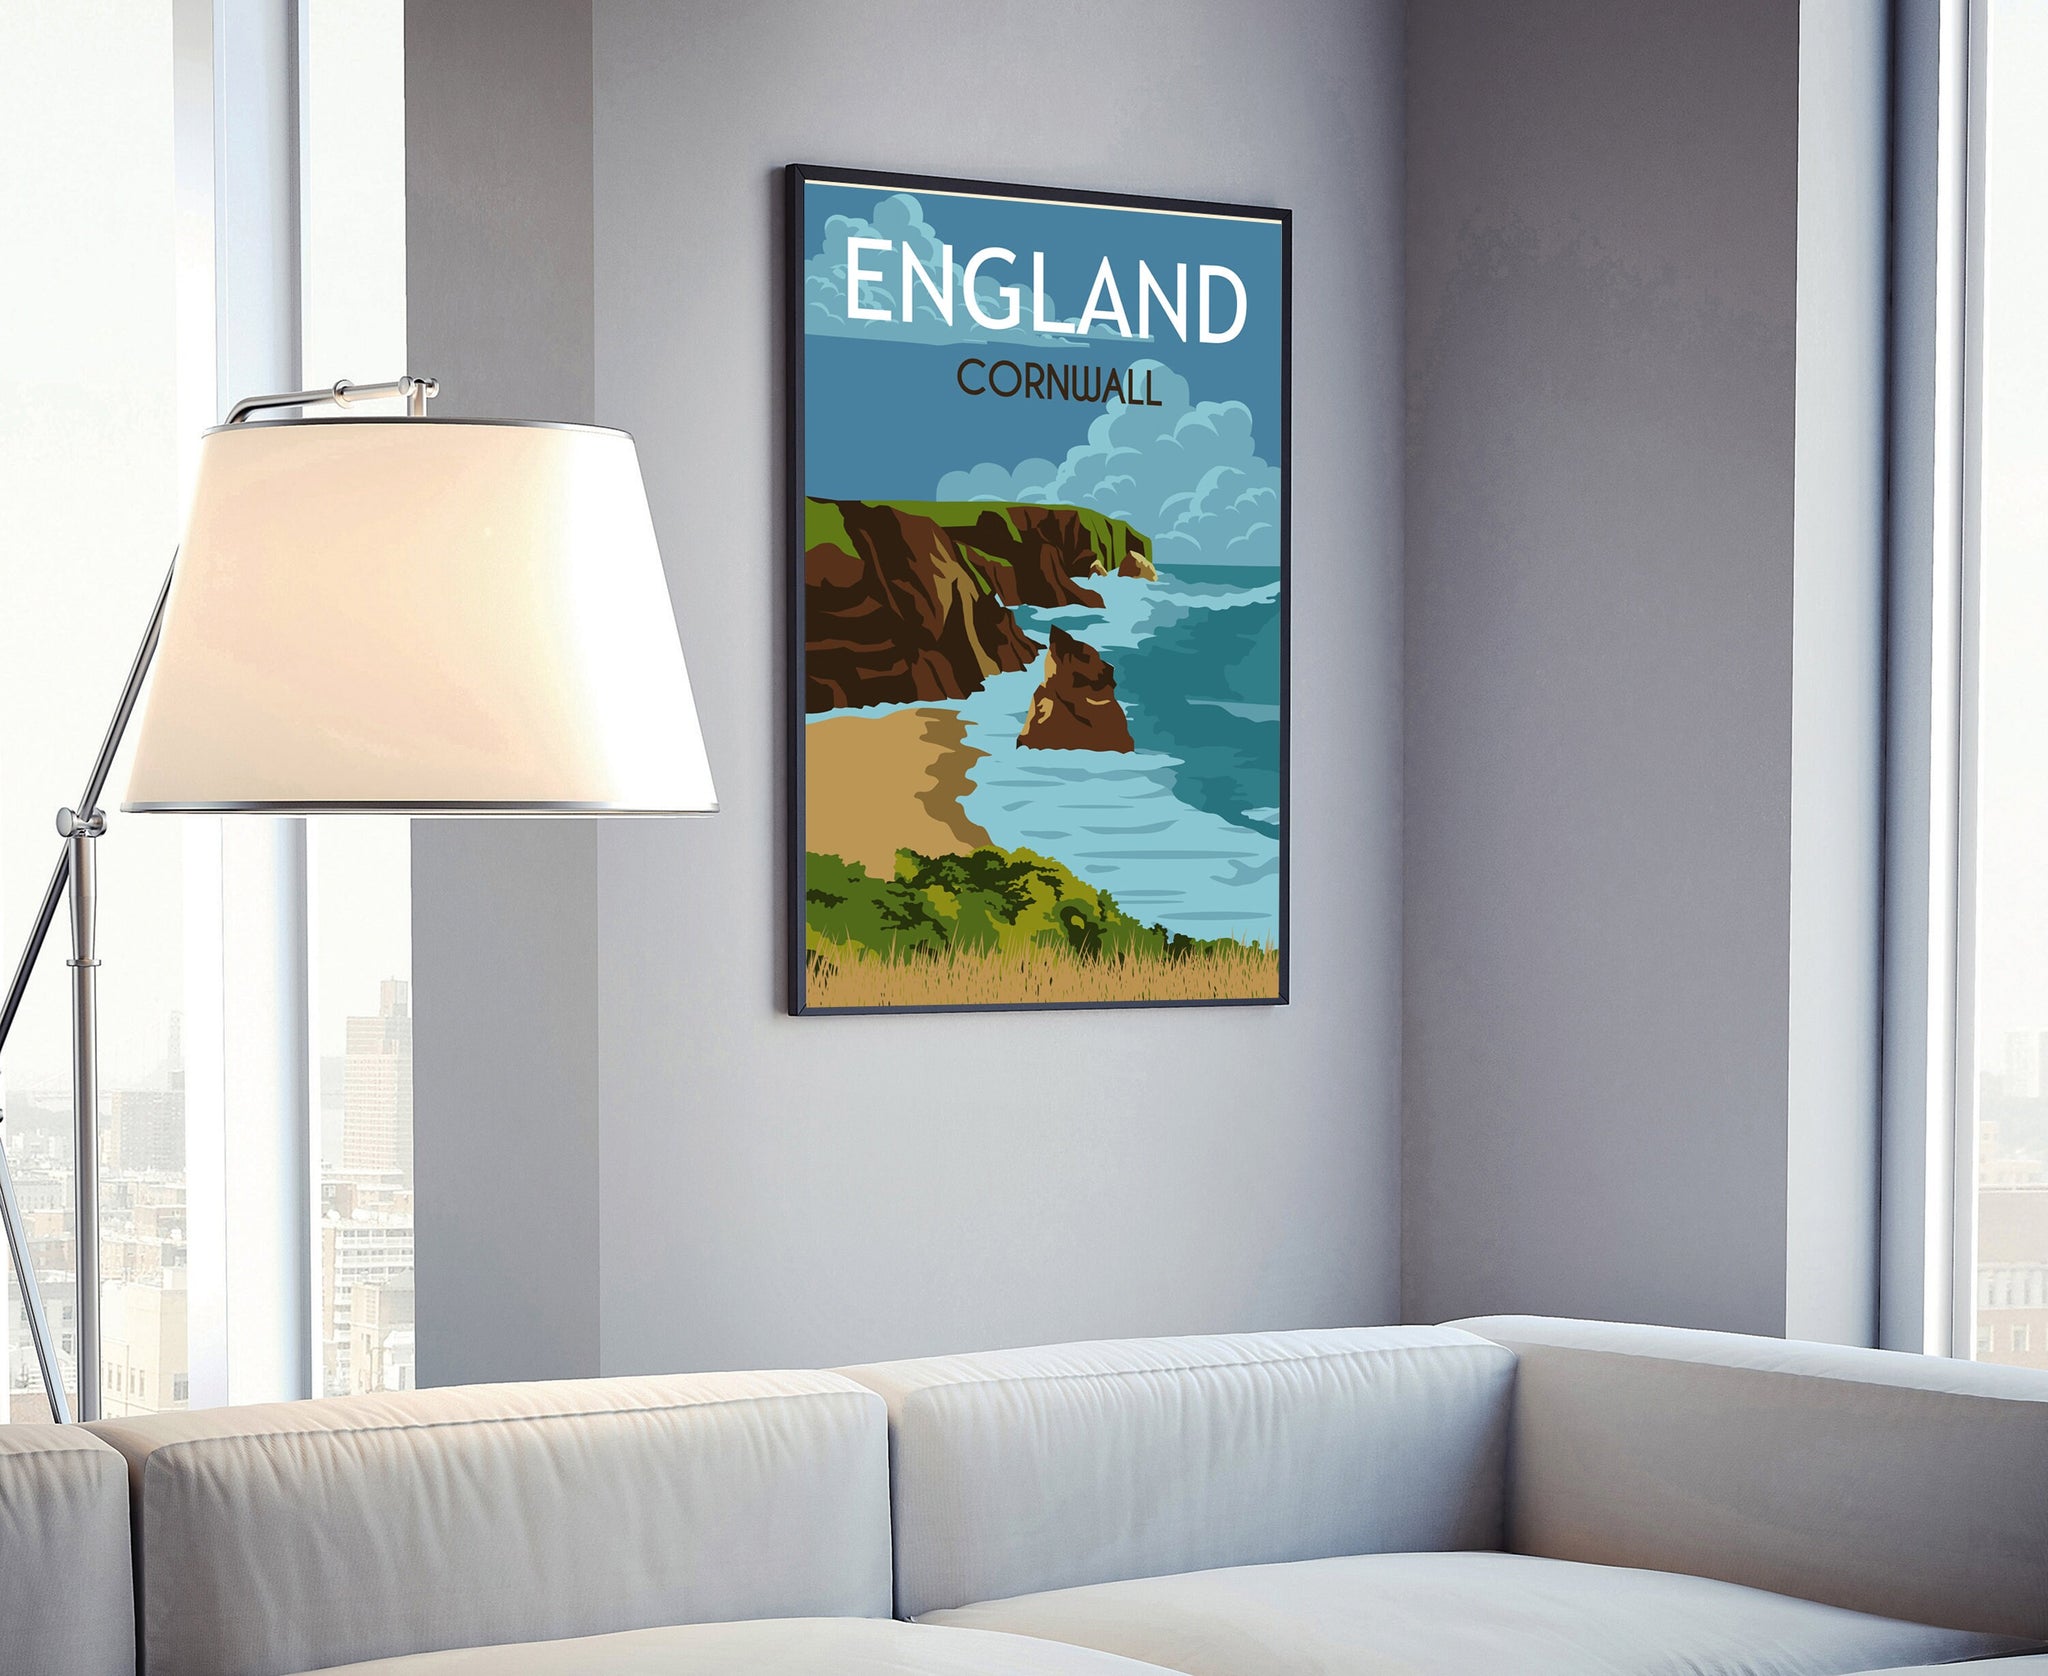 ENGLAND CORNWALL retro travel poster, England Cornwall cityscape poster, Cornwall landmark poster, Home wall art, Office wall decoration